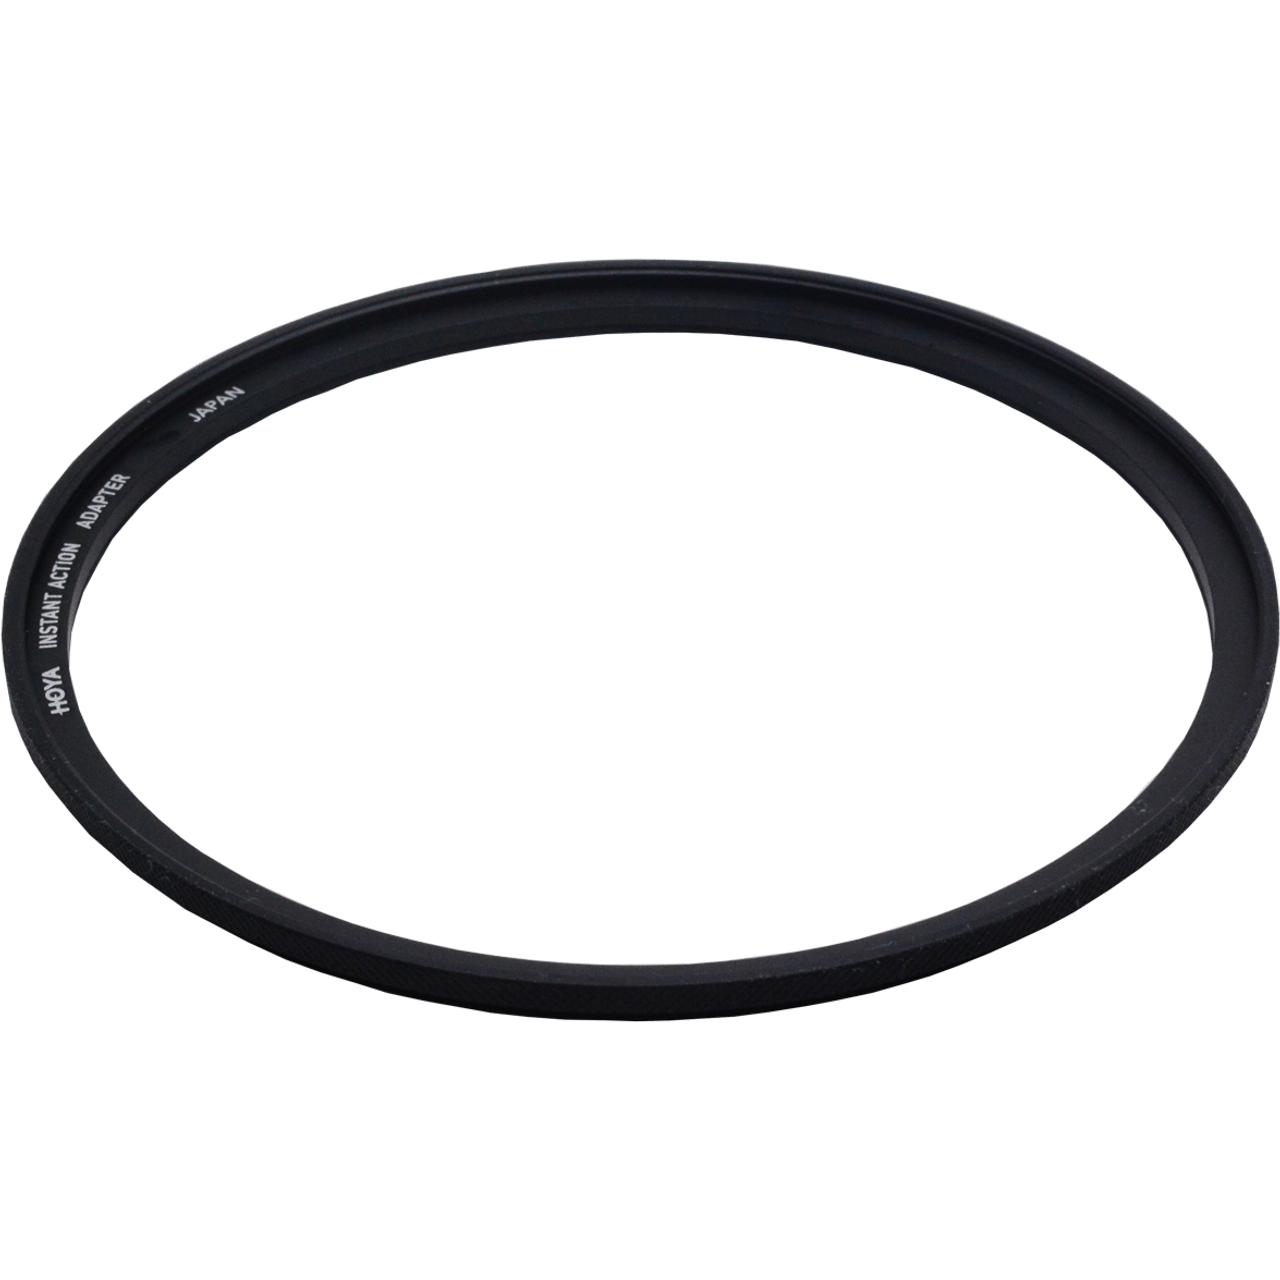 HOYA INSTANT ACTION ADAPTER RING (55MM)